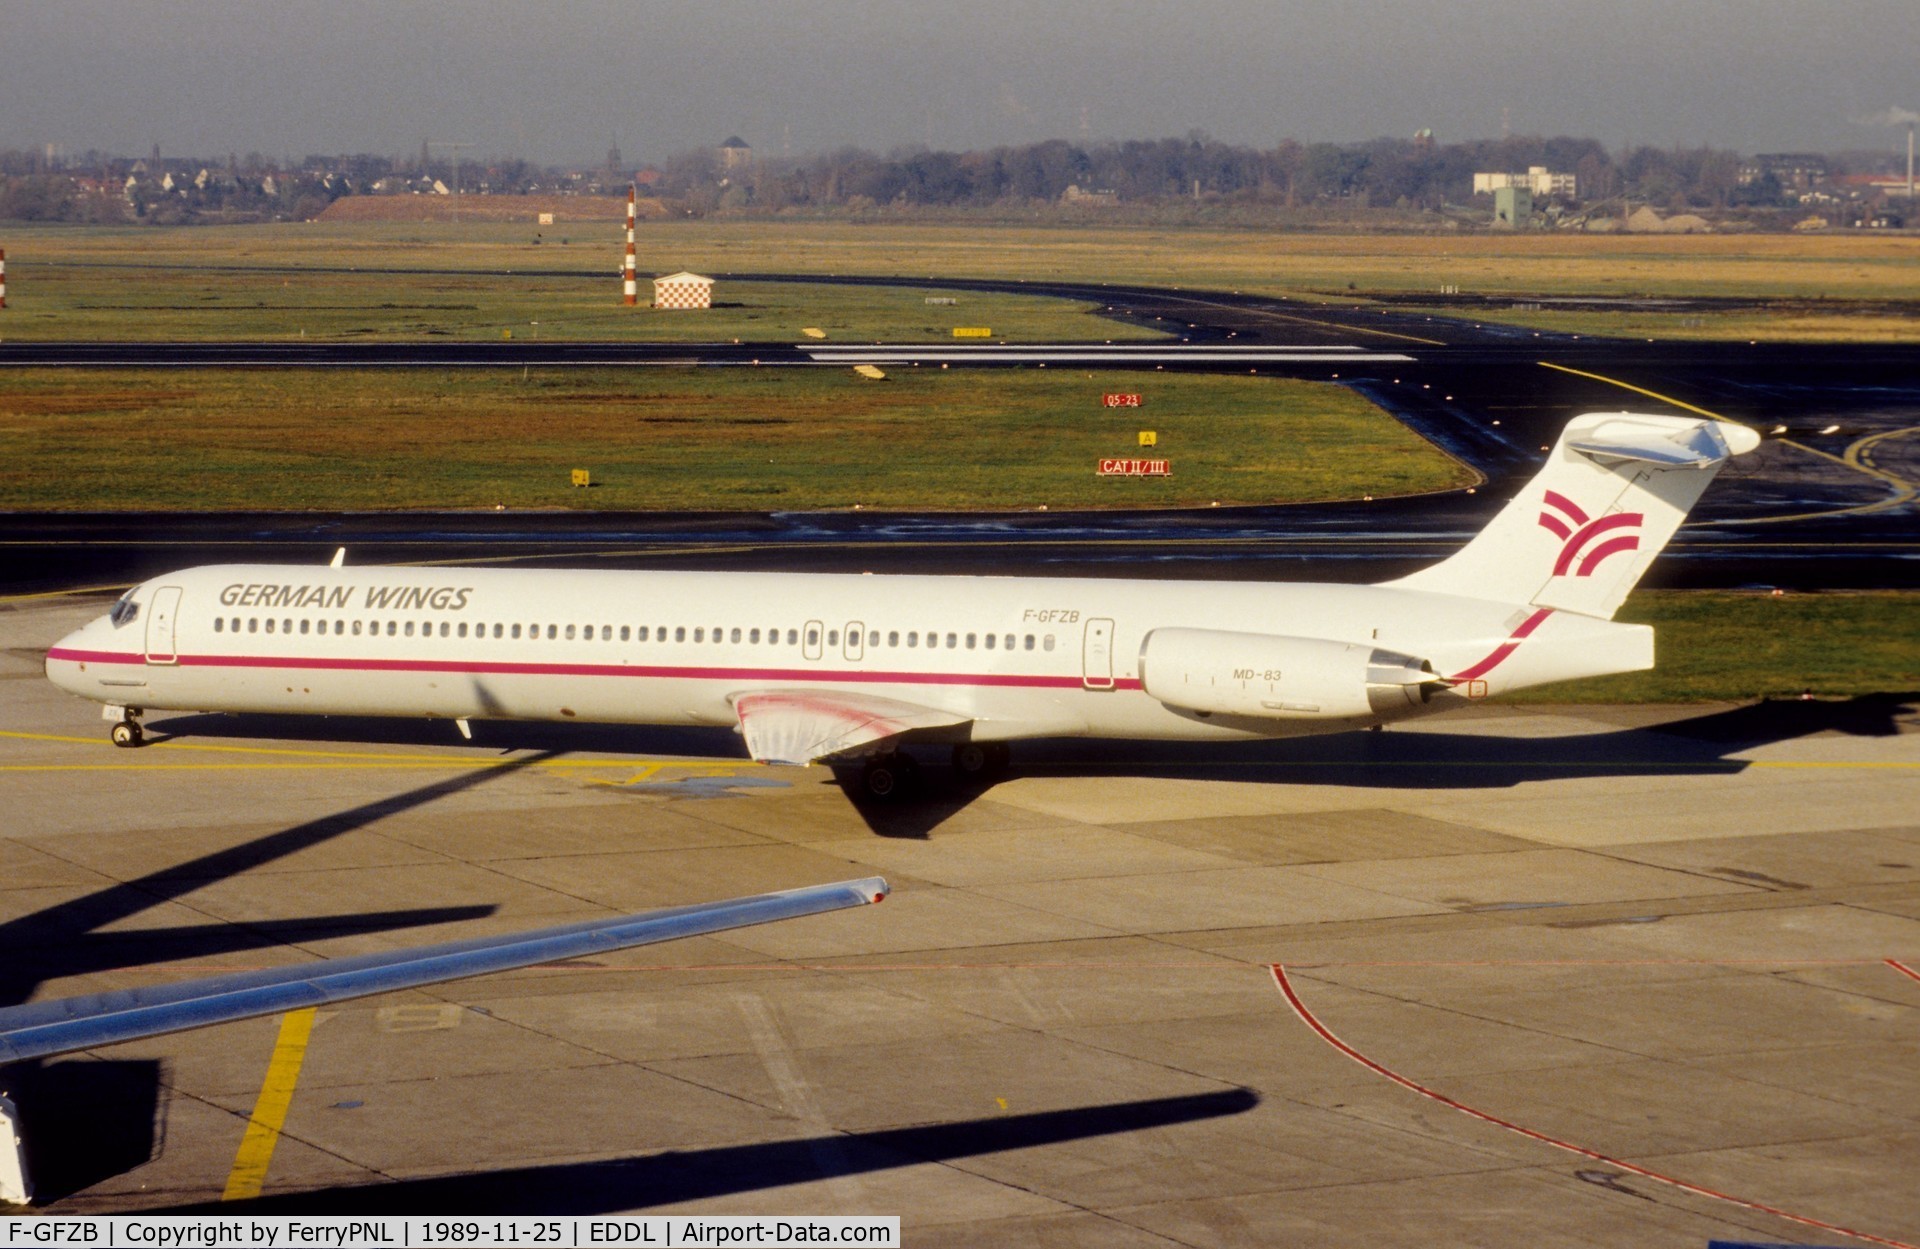 F-GFZB, 1988 McDonnell Douglas MD-83 (DC-9-83) C/N 49707, German Wings MD83 on short time lease from Air Liberte